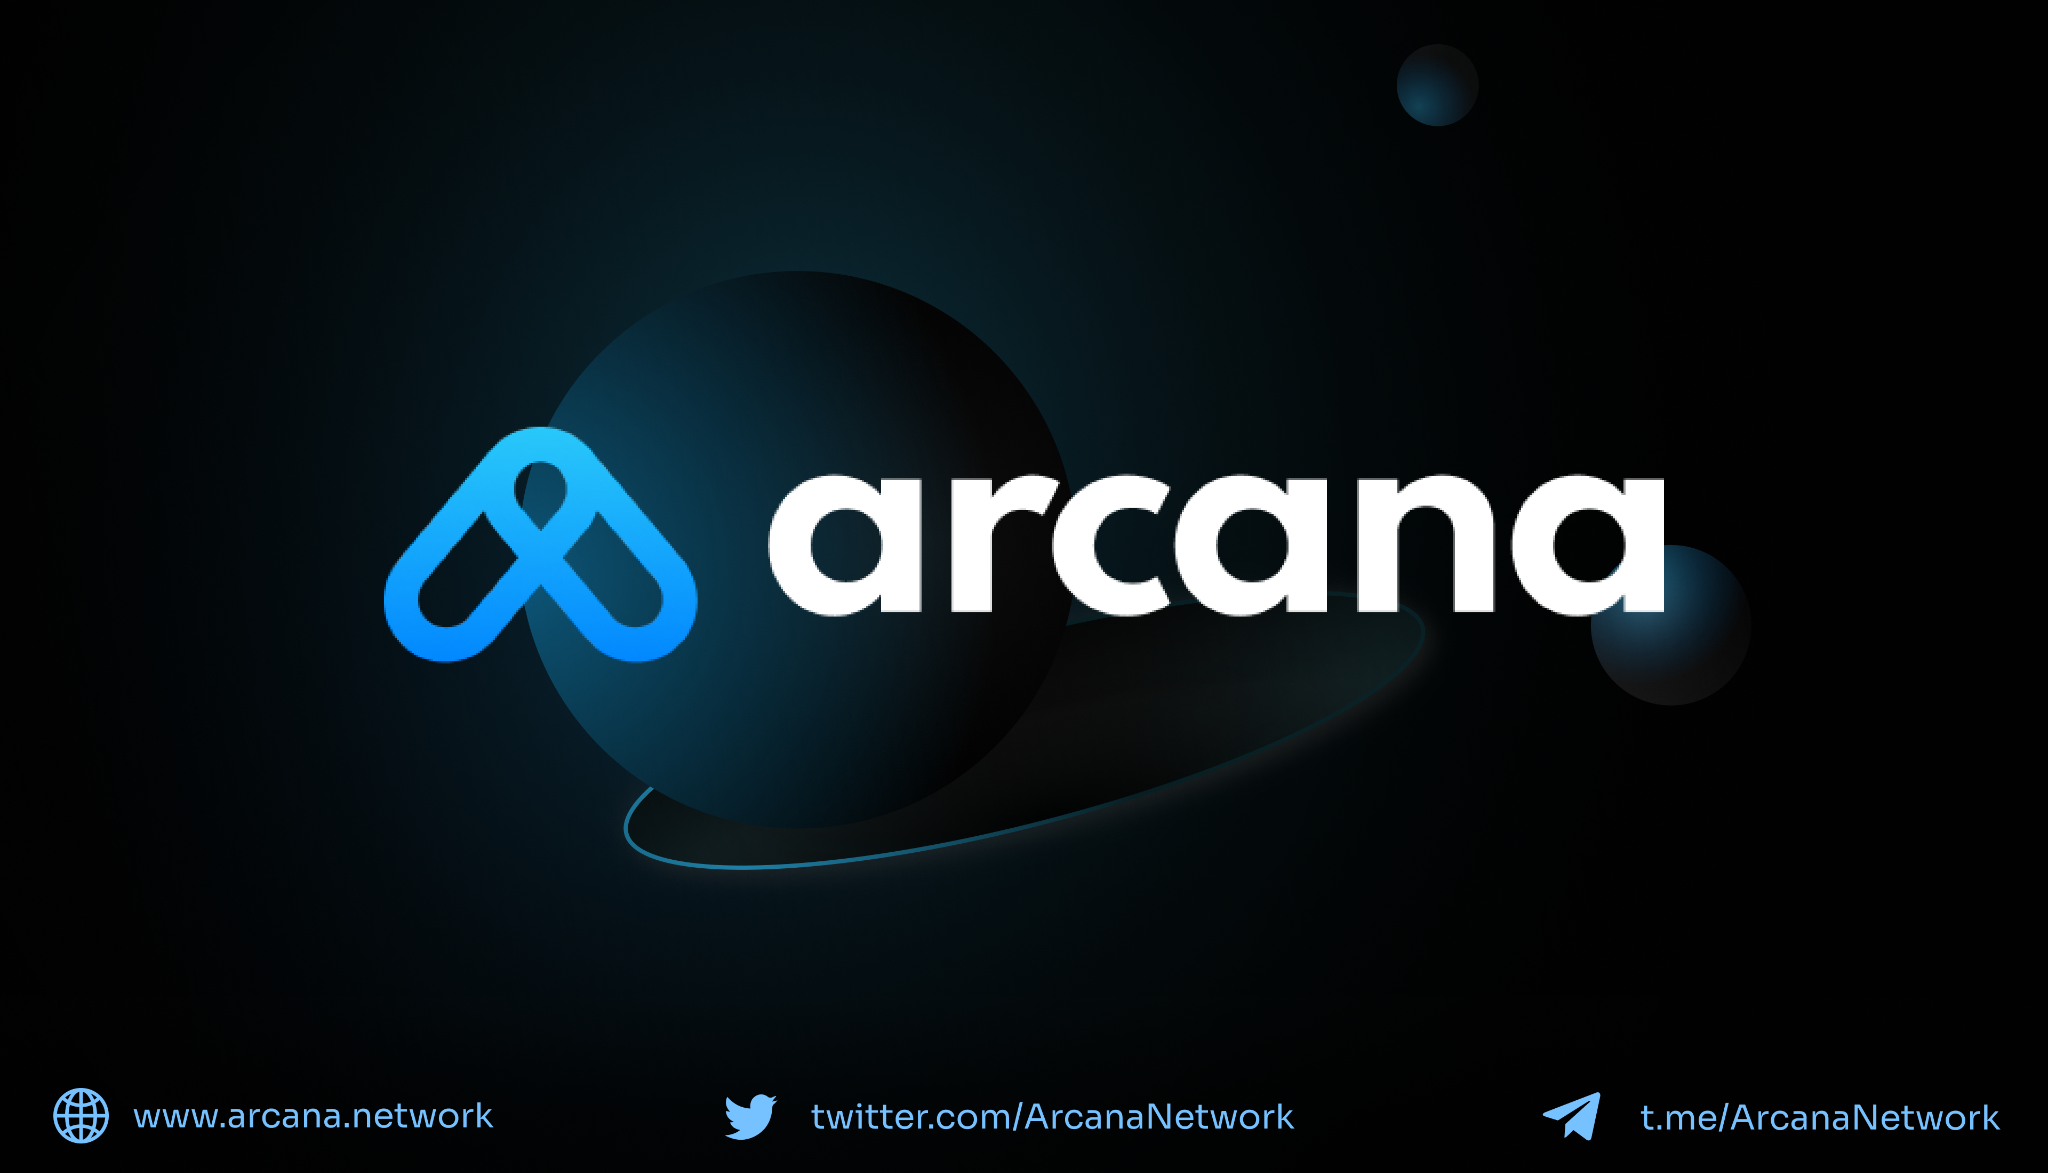 Arcana Network, Wednesday, October 13, 2021, Press release picture